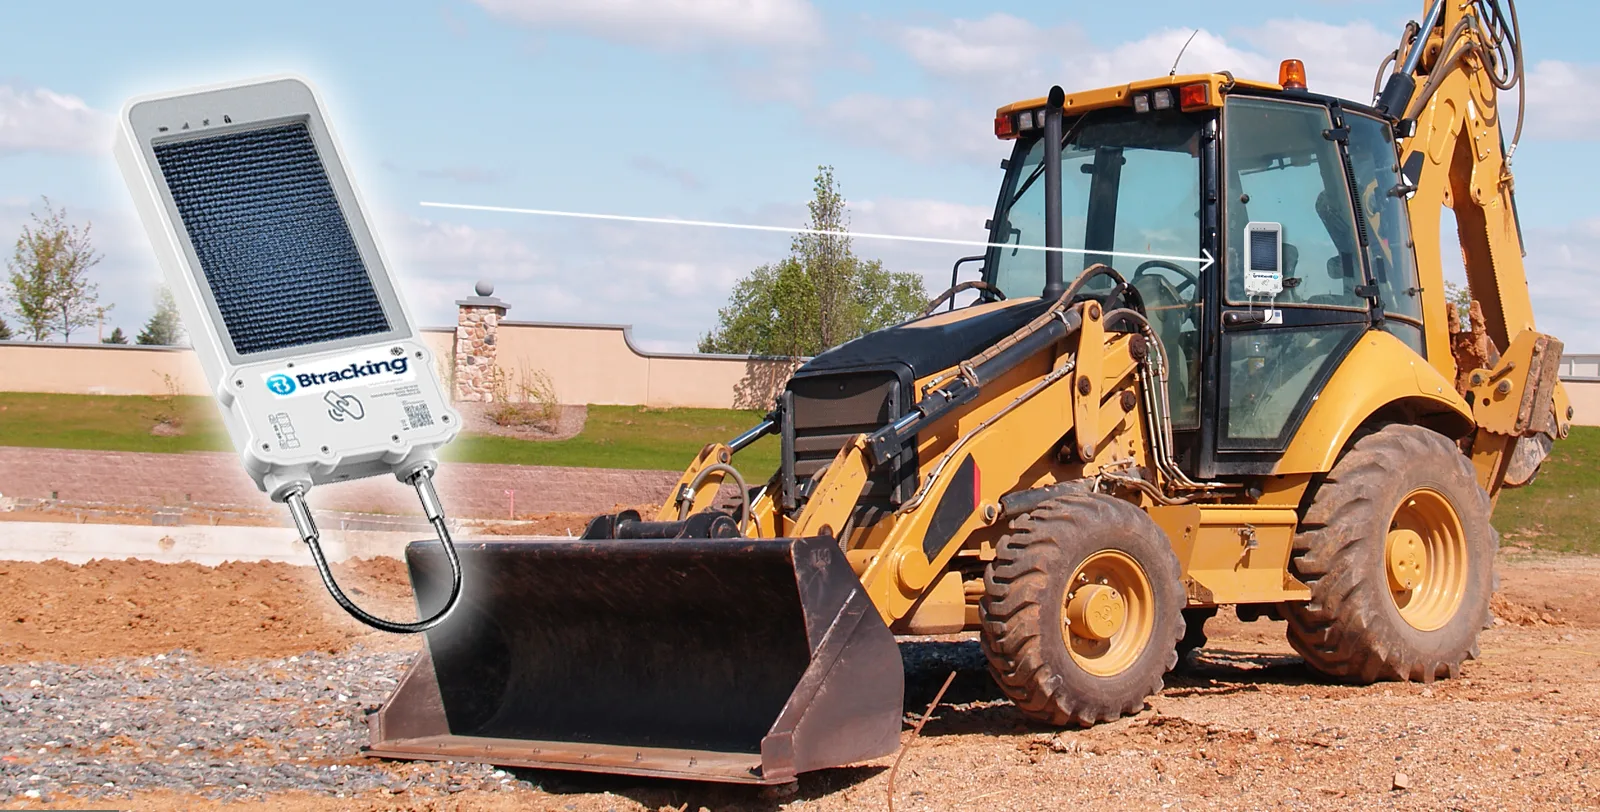 Btracking Protect Remote Heavy Machinery and Stationary Equipment